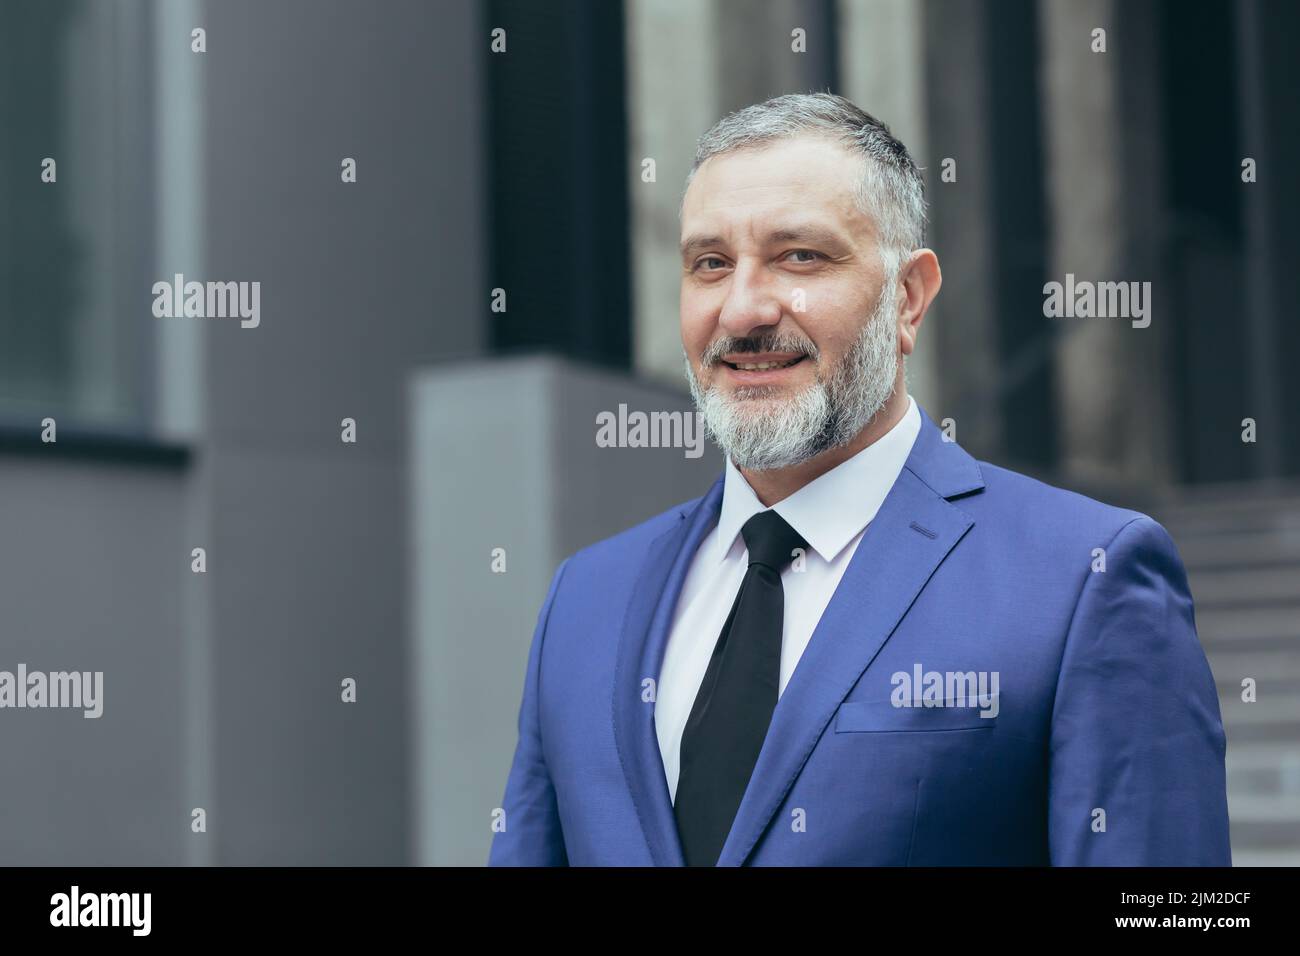 Close up photo portrait of successful and senior experienced businessman, boss smiling and looking at camera, man in business suit standing outside office building Stock Photo